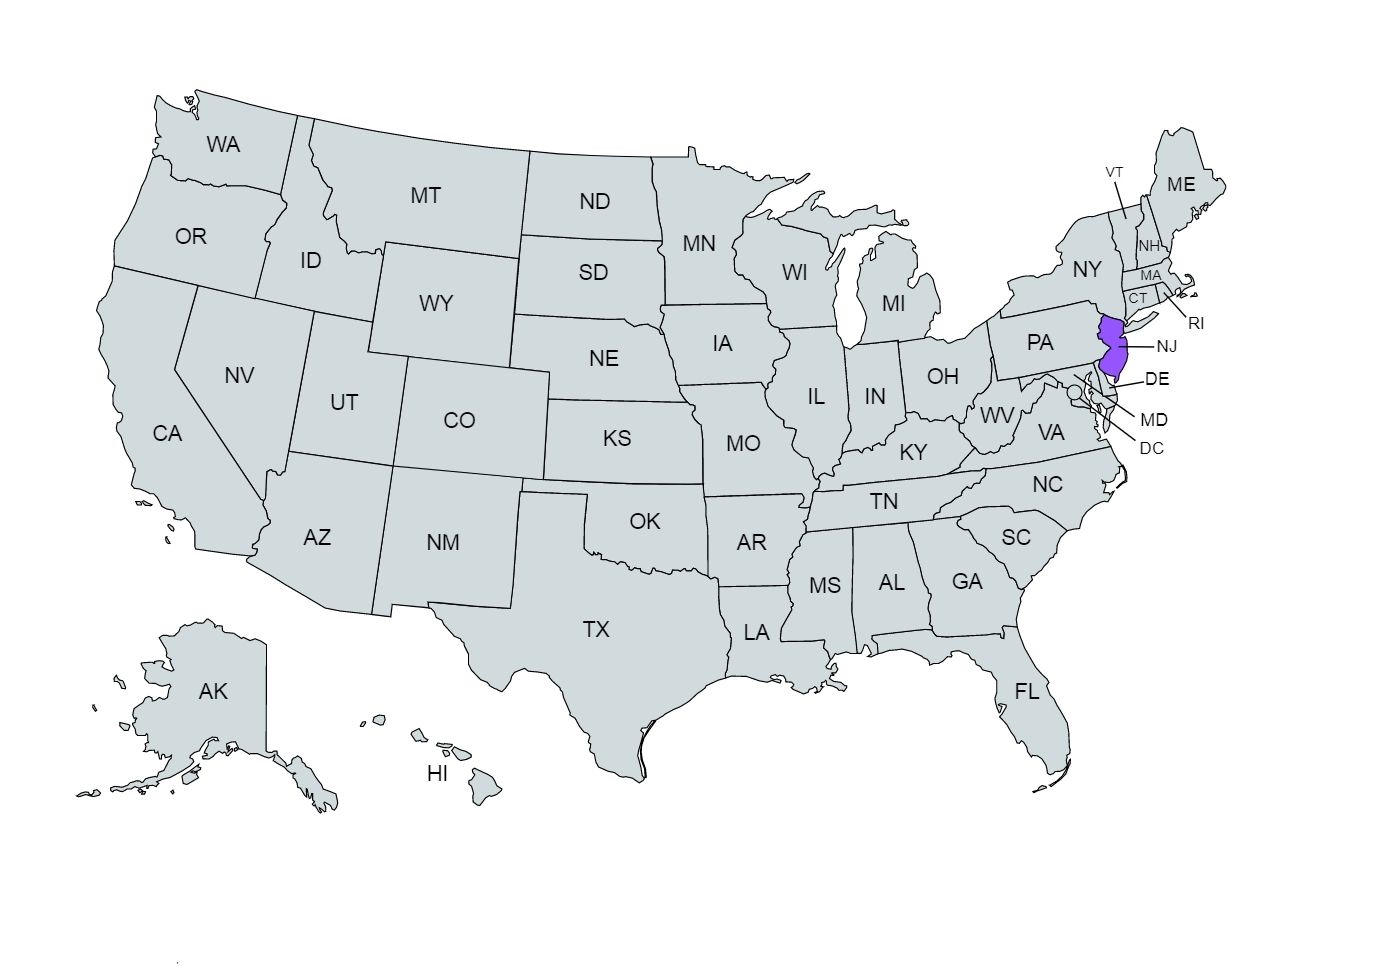 The US map with the New Jersey state marked in purple